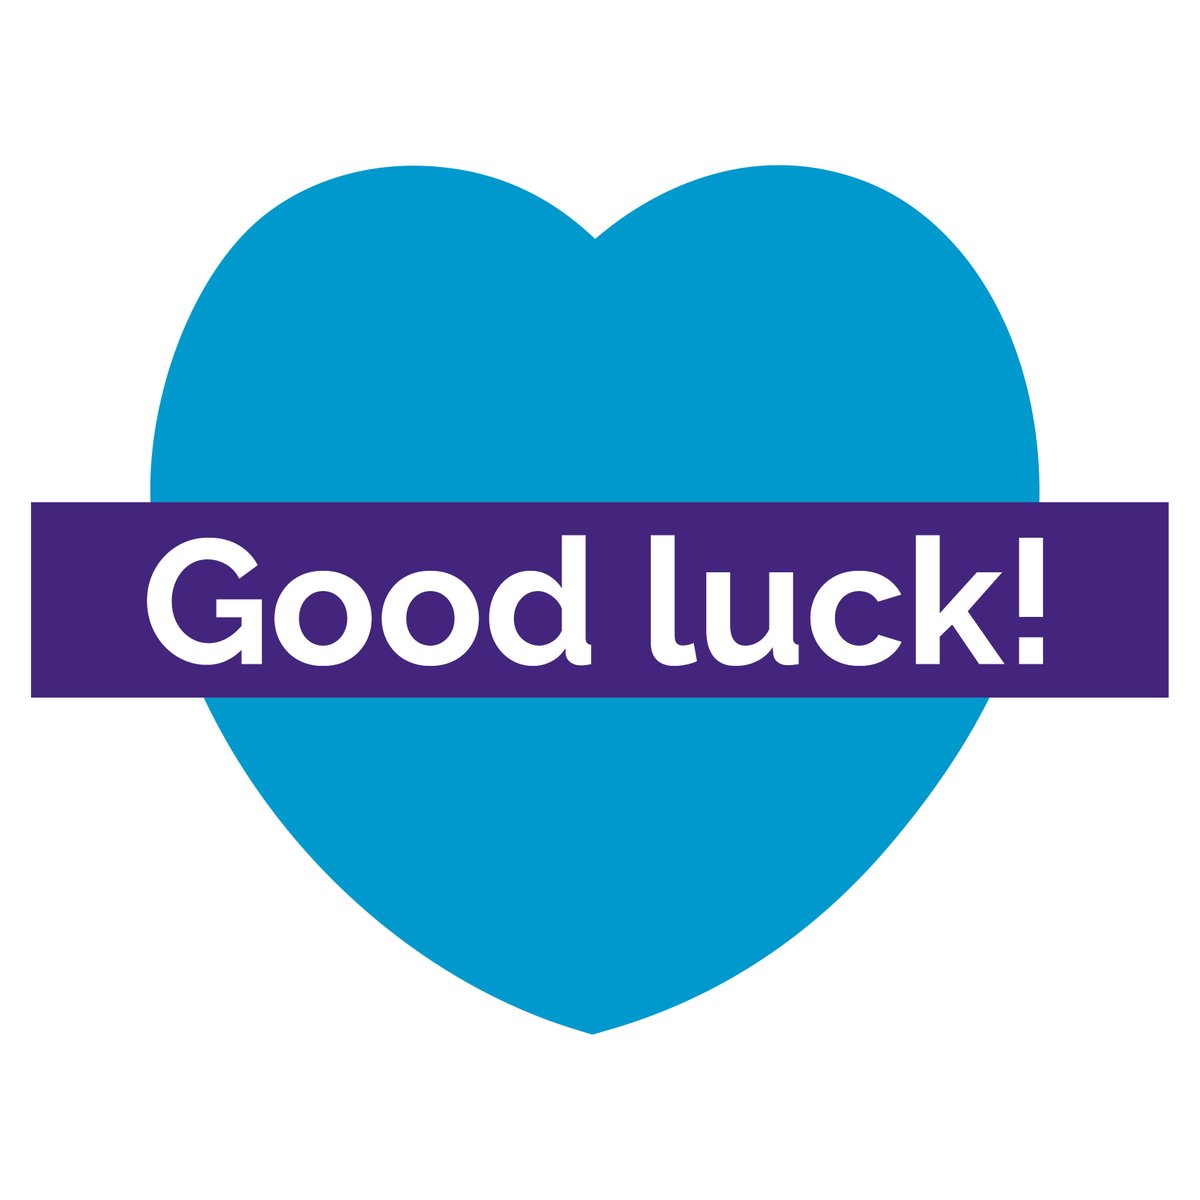 Good luck to everyone taking part in the The Hitchin 10km and Children's Golden Mile today - you are all awesome! 🙌💙👏🏼